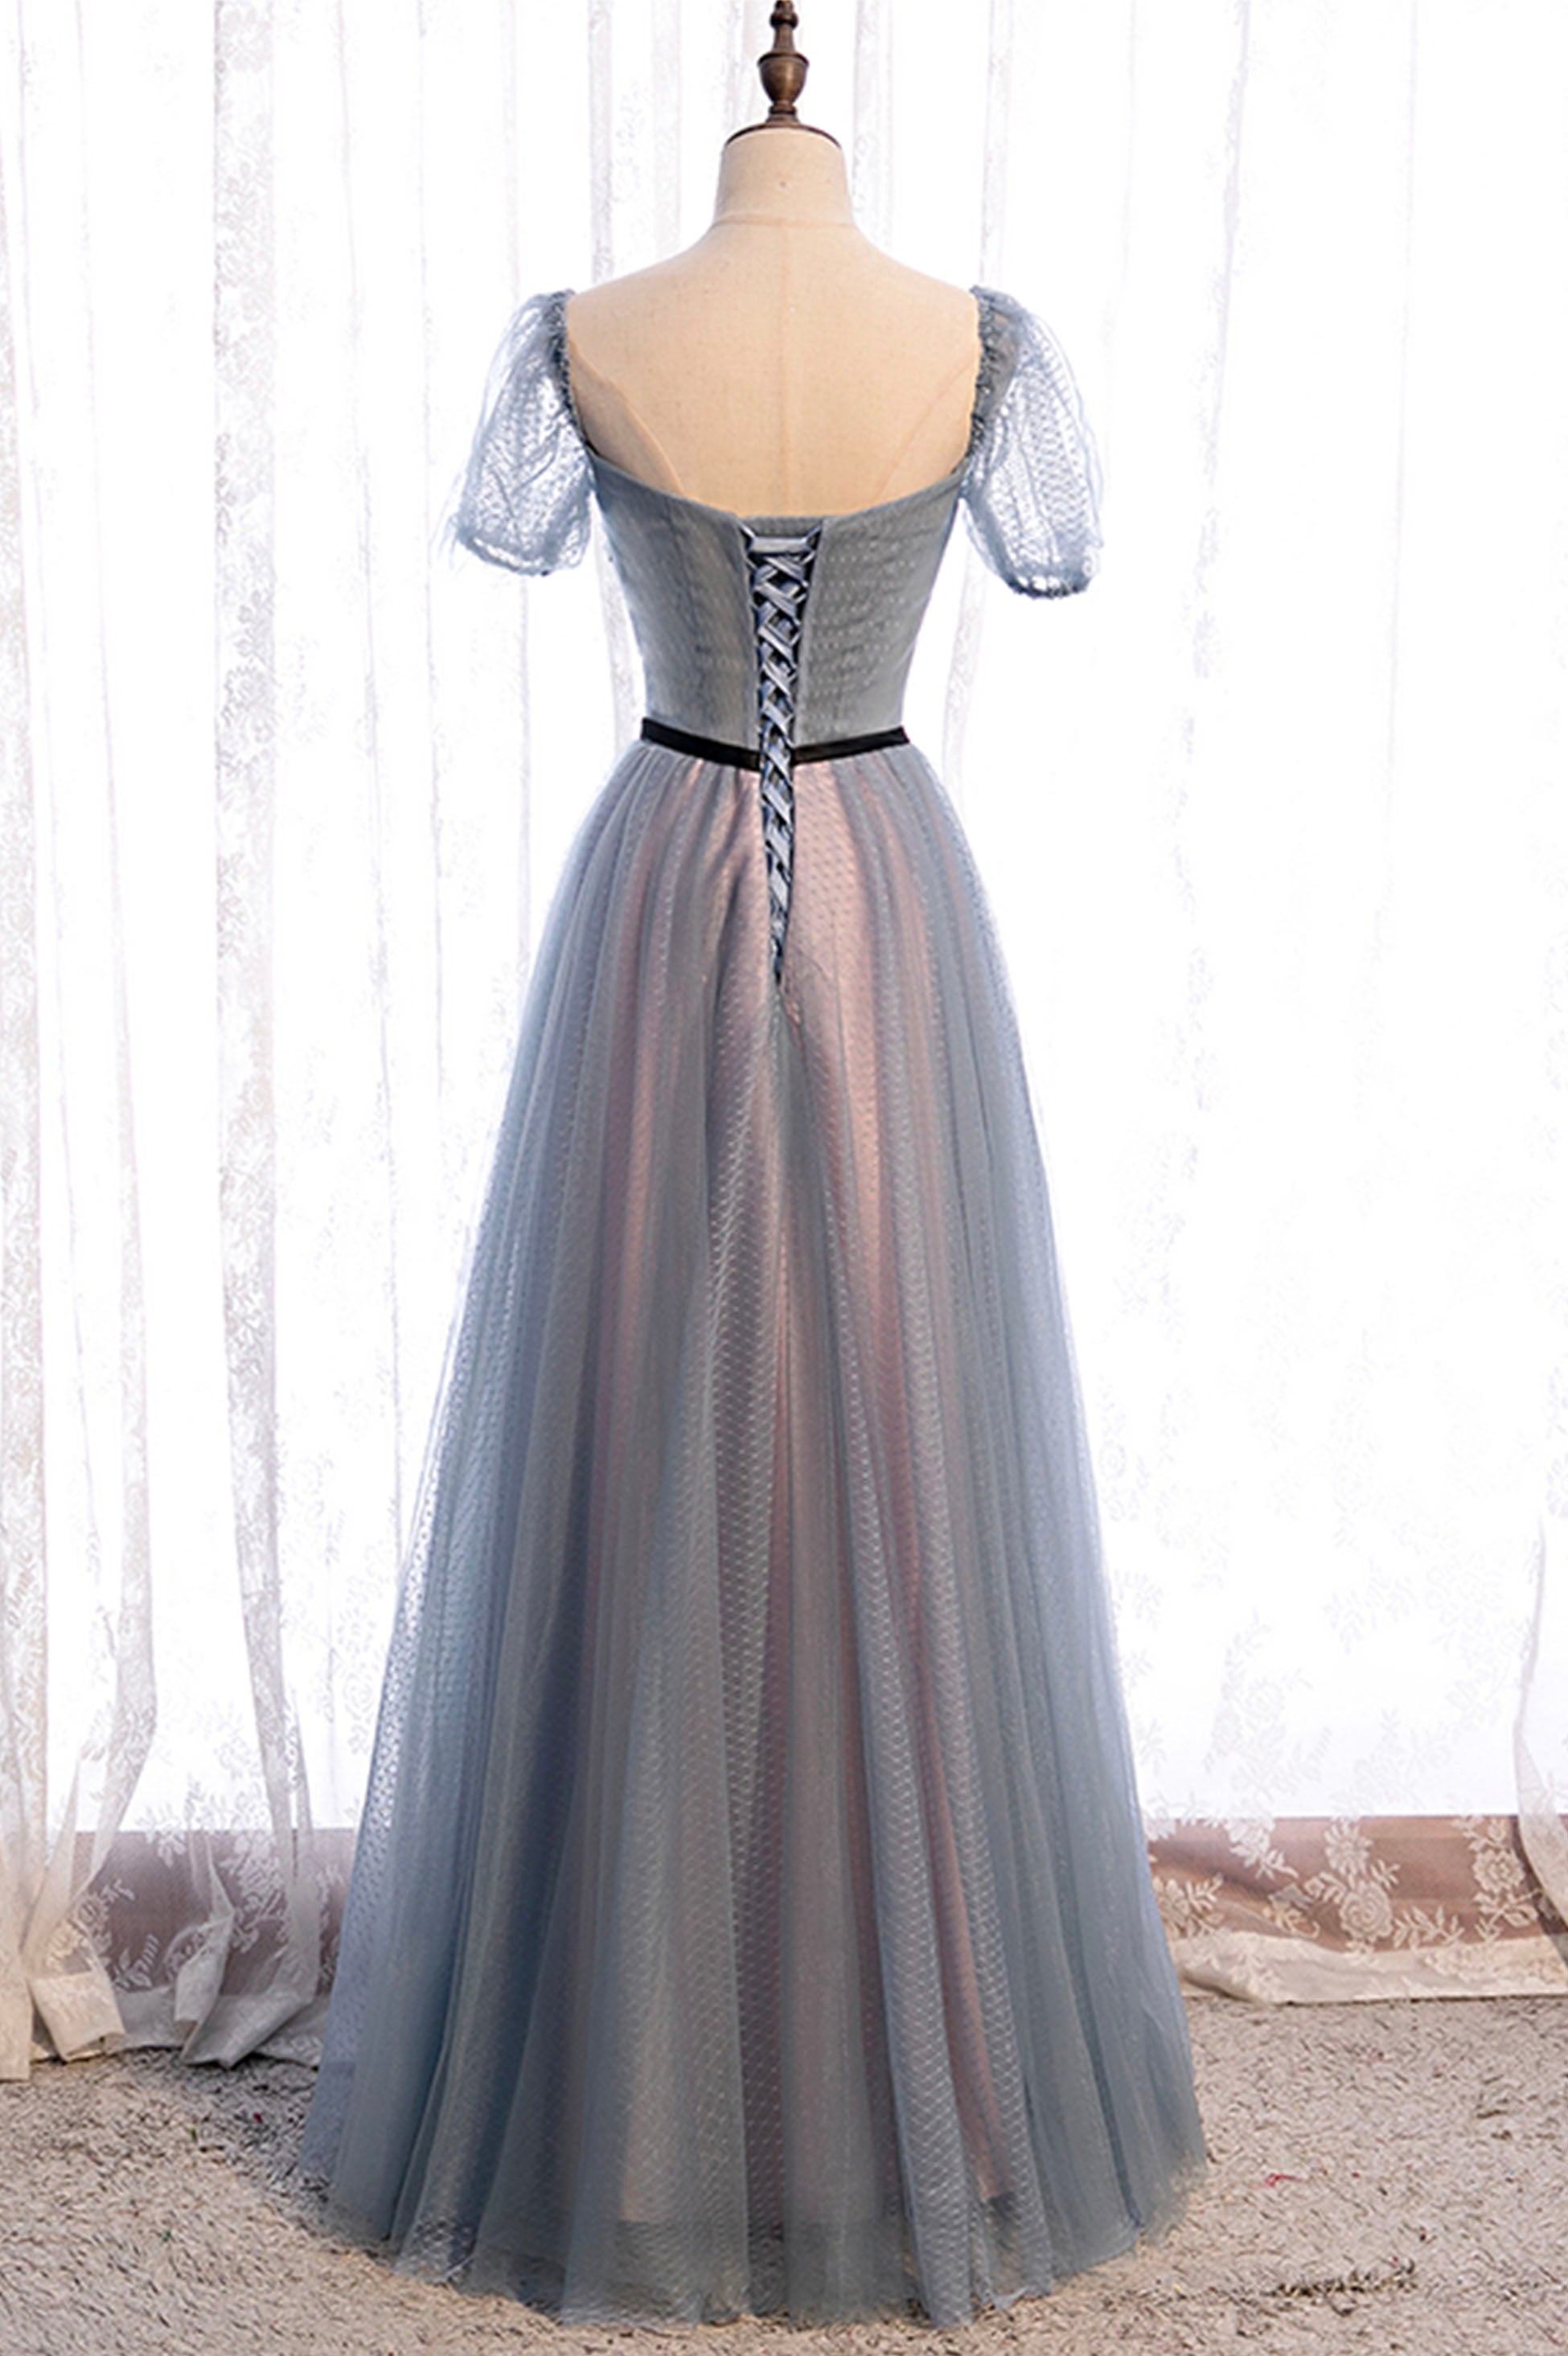 Bridesmaid Dressing Gown, Gray Blue Tulle Long A-Line Prom Dress, Cute Short Sleeve Evening Dress